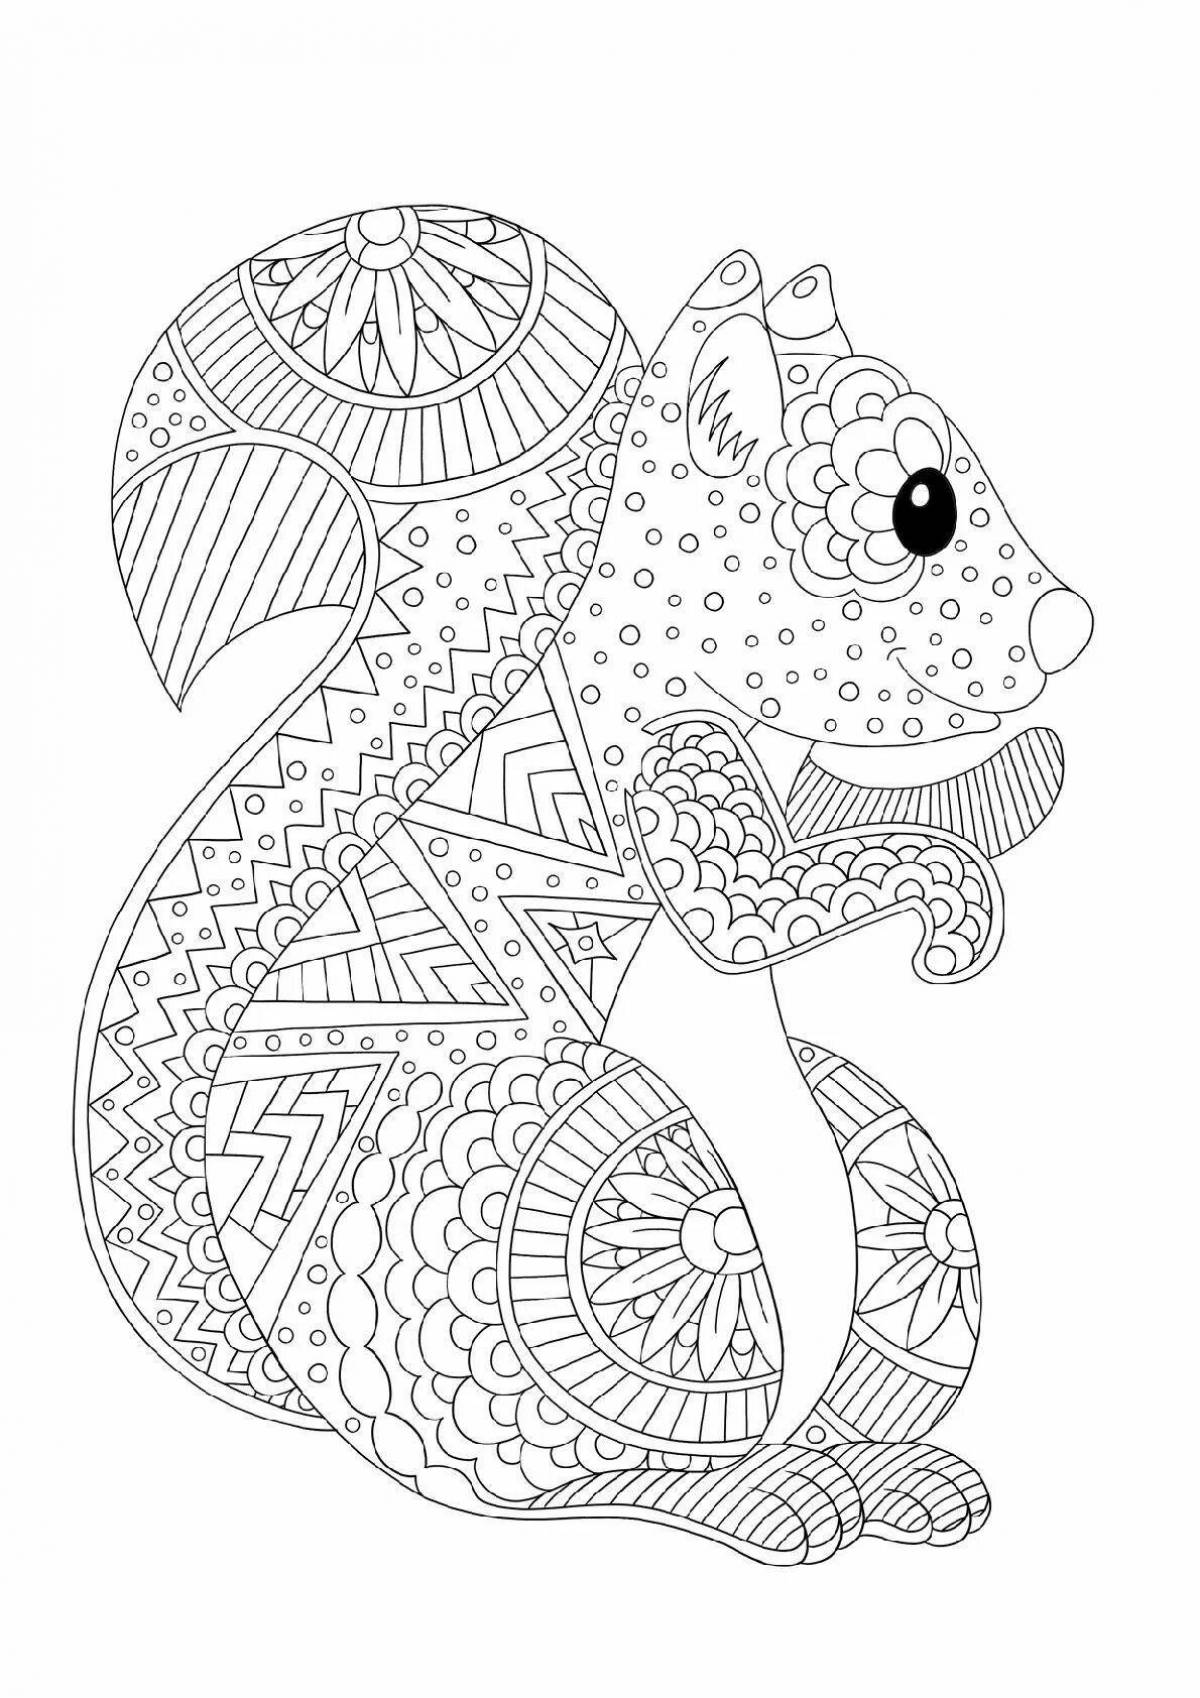 Live anti-stress coloring book with animals for kids